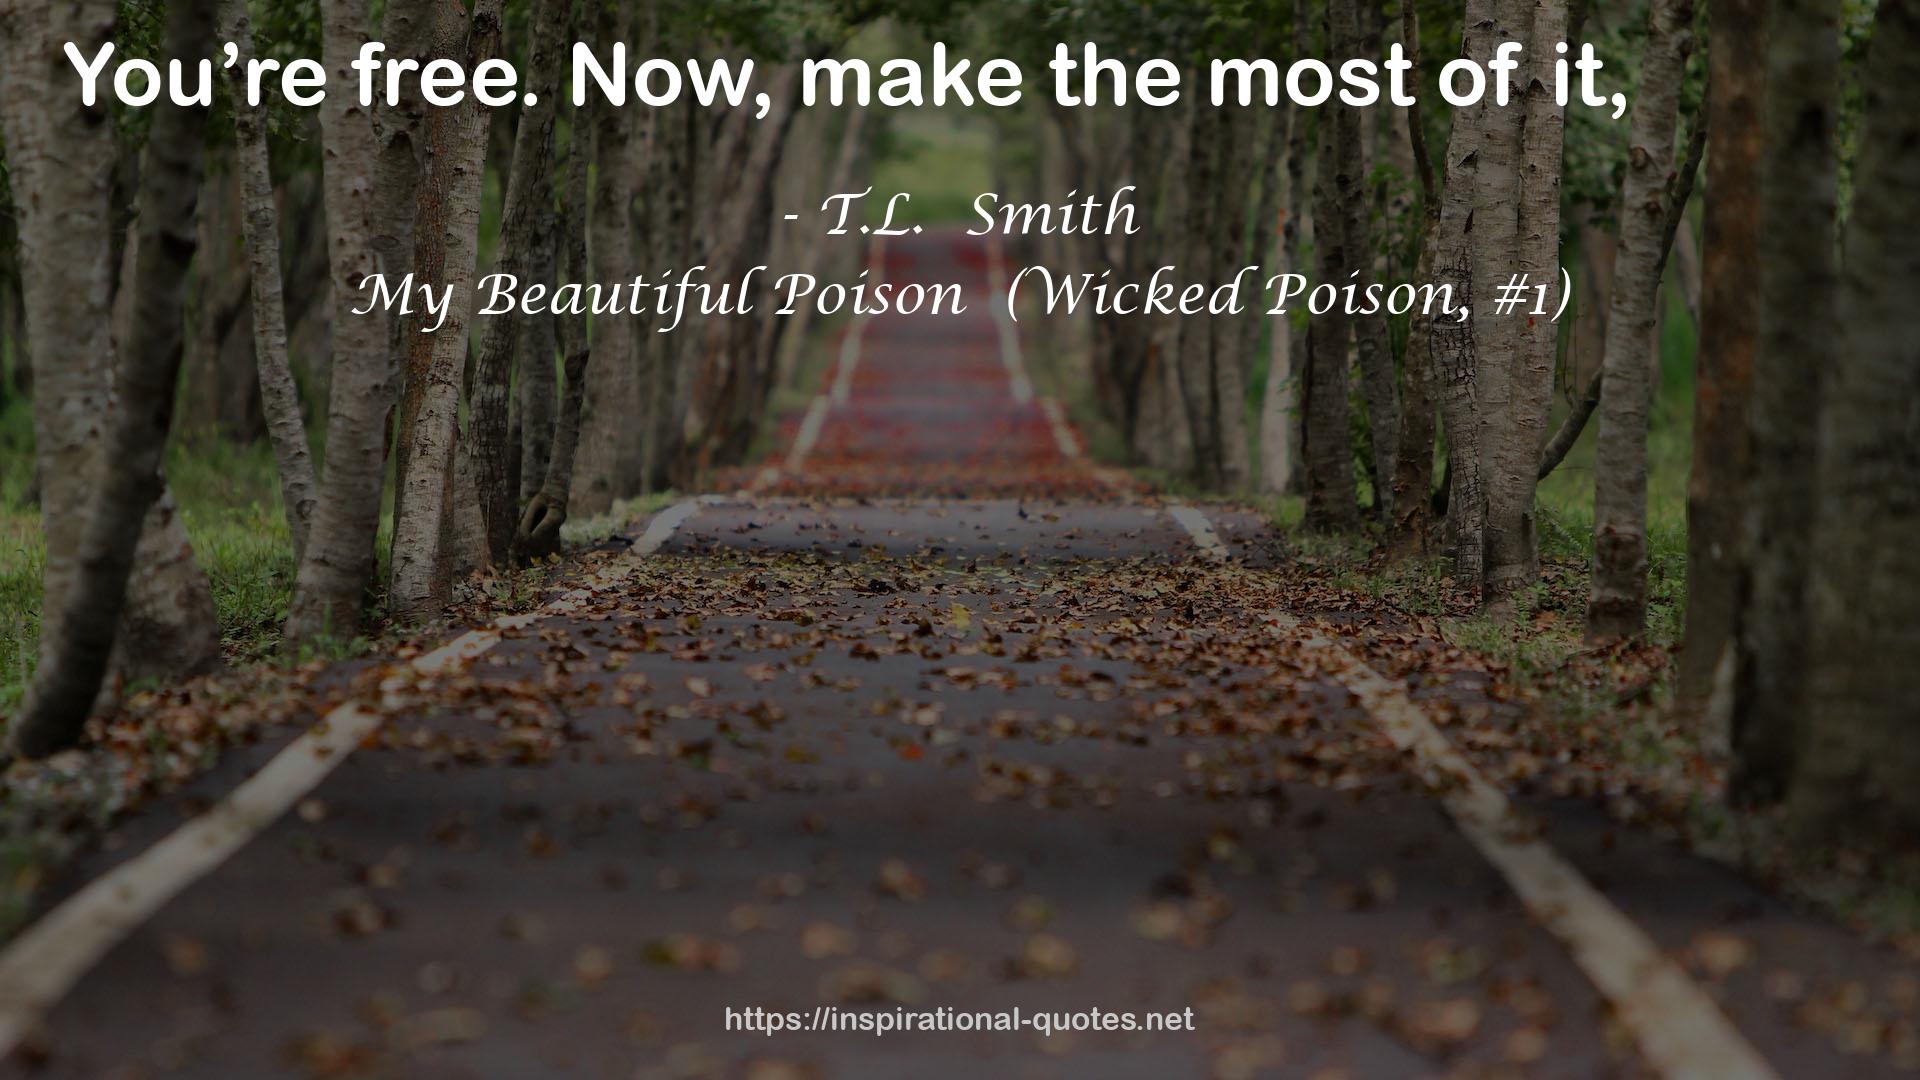 My Beautiful Poison  (Wicked Poison, #1) QUOTES